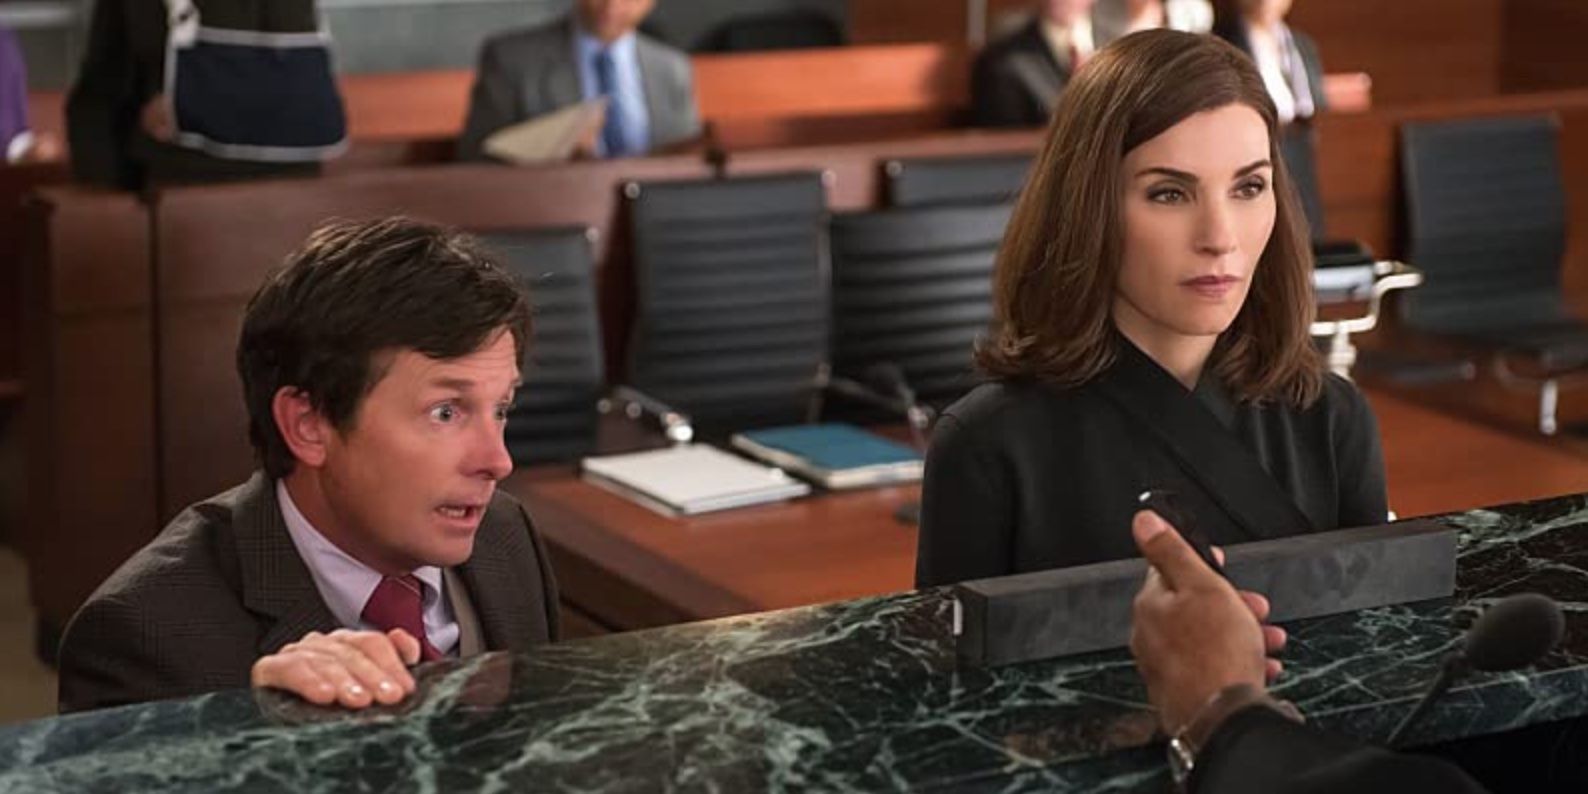 Michael J. Fox and Julianna Margulies in 'The Good Wife'